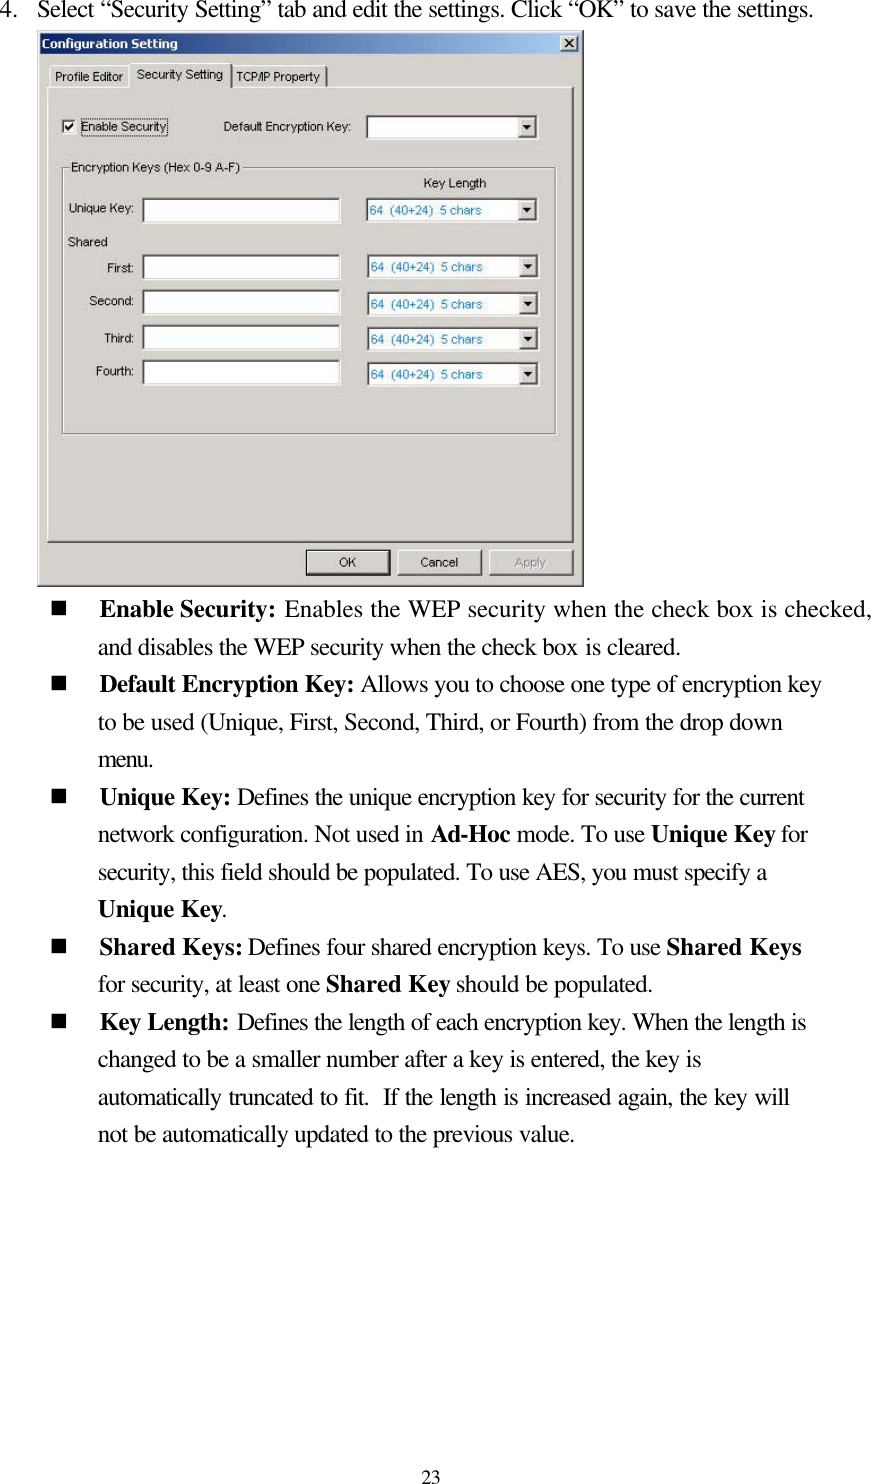  23 4.  Select “Security Setting” tab and edit the settings. Click “OK” to save the settings.  n Enable Security: Enables the WEP security when the check box is checked, and disables the WEP security when the check box is cleared. n Default Encryption Key: Allows you to choose one type of encryption key to be used (Unique, First, Second, Third, or Fourth) from the drop down menu. n Unique Key: Defines the unique encryption key for security for the current network configuration. Not used in Ad-Hoc mode. To use Unique Key for security, this field should be populated. To use AES, you must specify a Unique Key. n Shared Keys: Defines four shared encryption keys. To use Shared Keys for security, at least one Shared Key should be populated. n Key Length: Defines the length of each encryption key. When the length is changed to be a smaller number after a key is entered, the key is automatically truncated to fit.  If the length is increased again, the key will not be automatically updated to the previous value.   